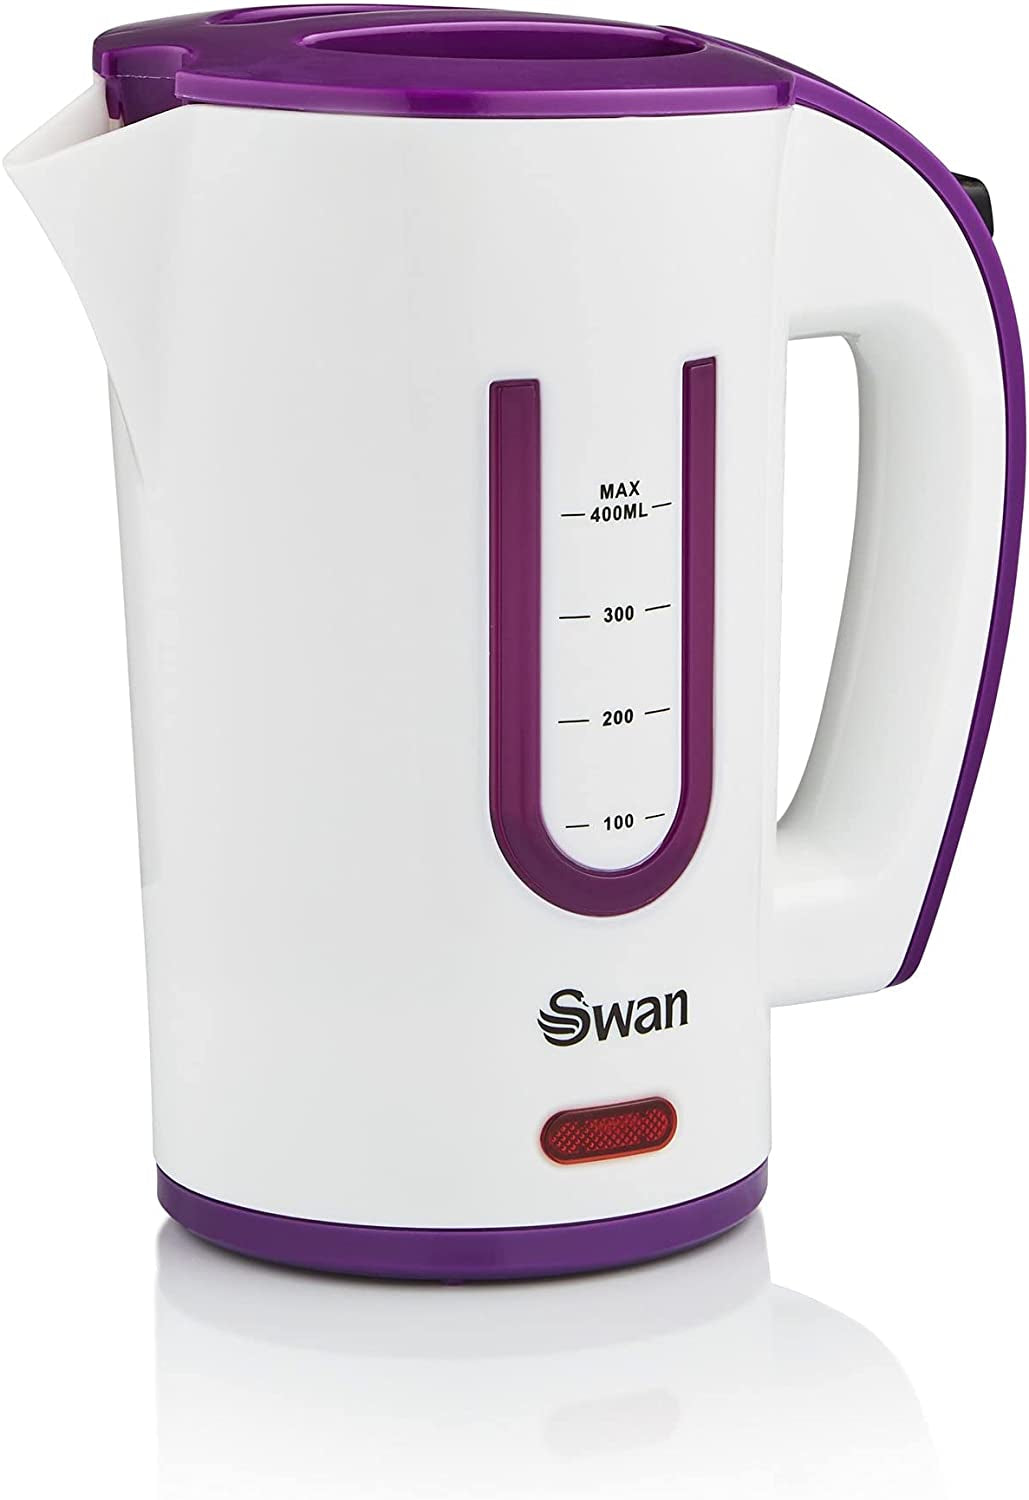 SK27010N Dual Voltage Fast Boil Lightweight & Compact Travel Kettle with Two Tea Cups, Plastic, 1000 W, White/Purple